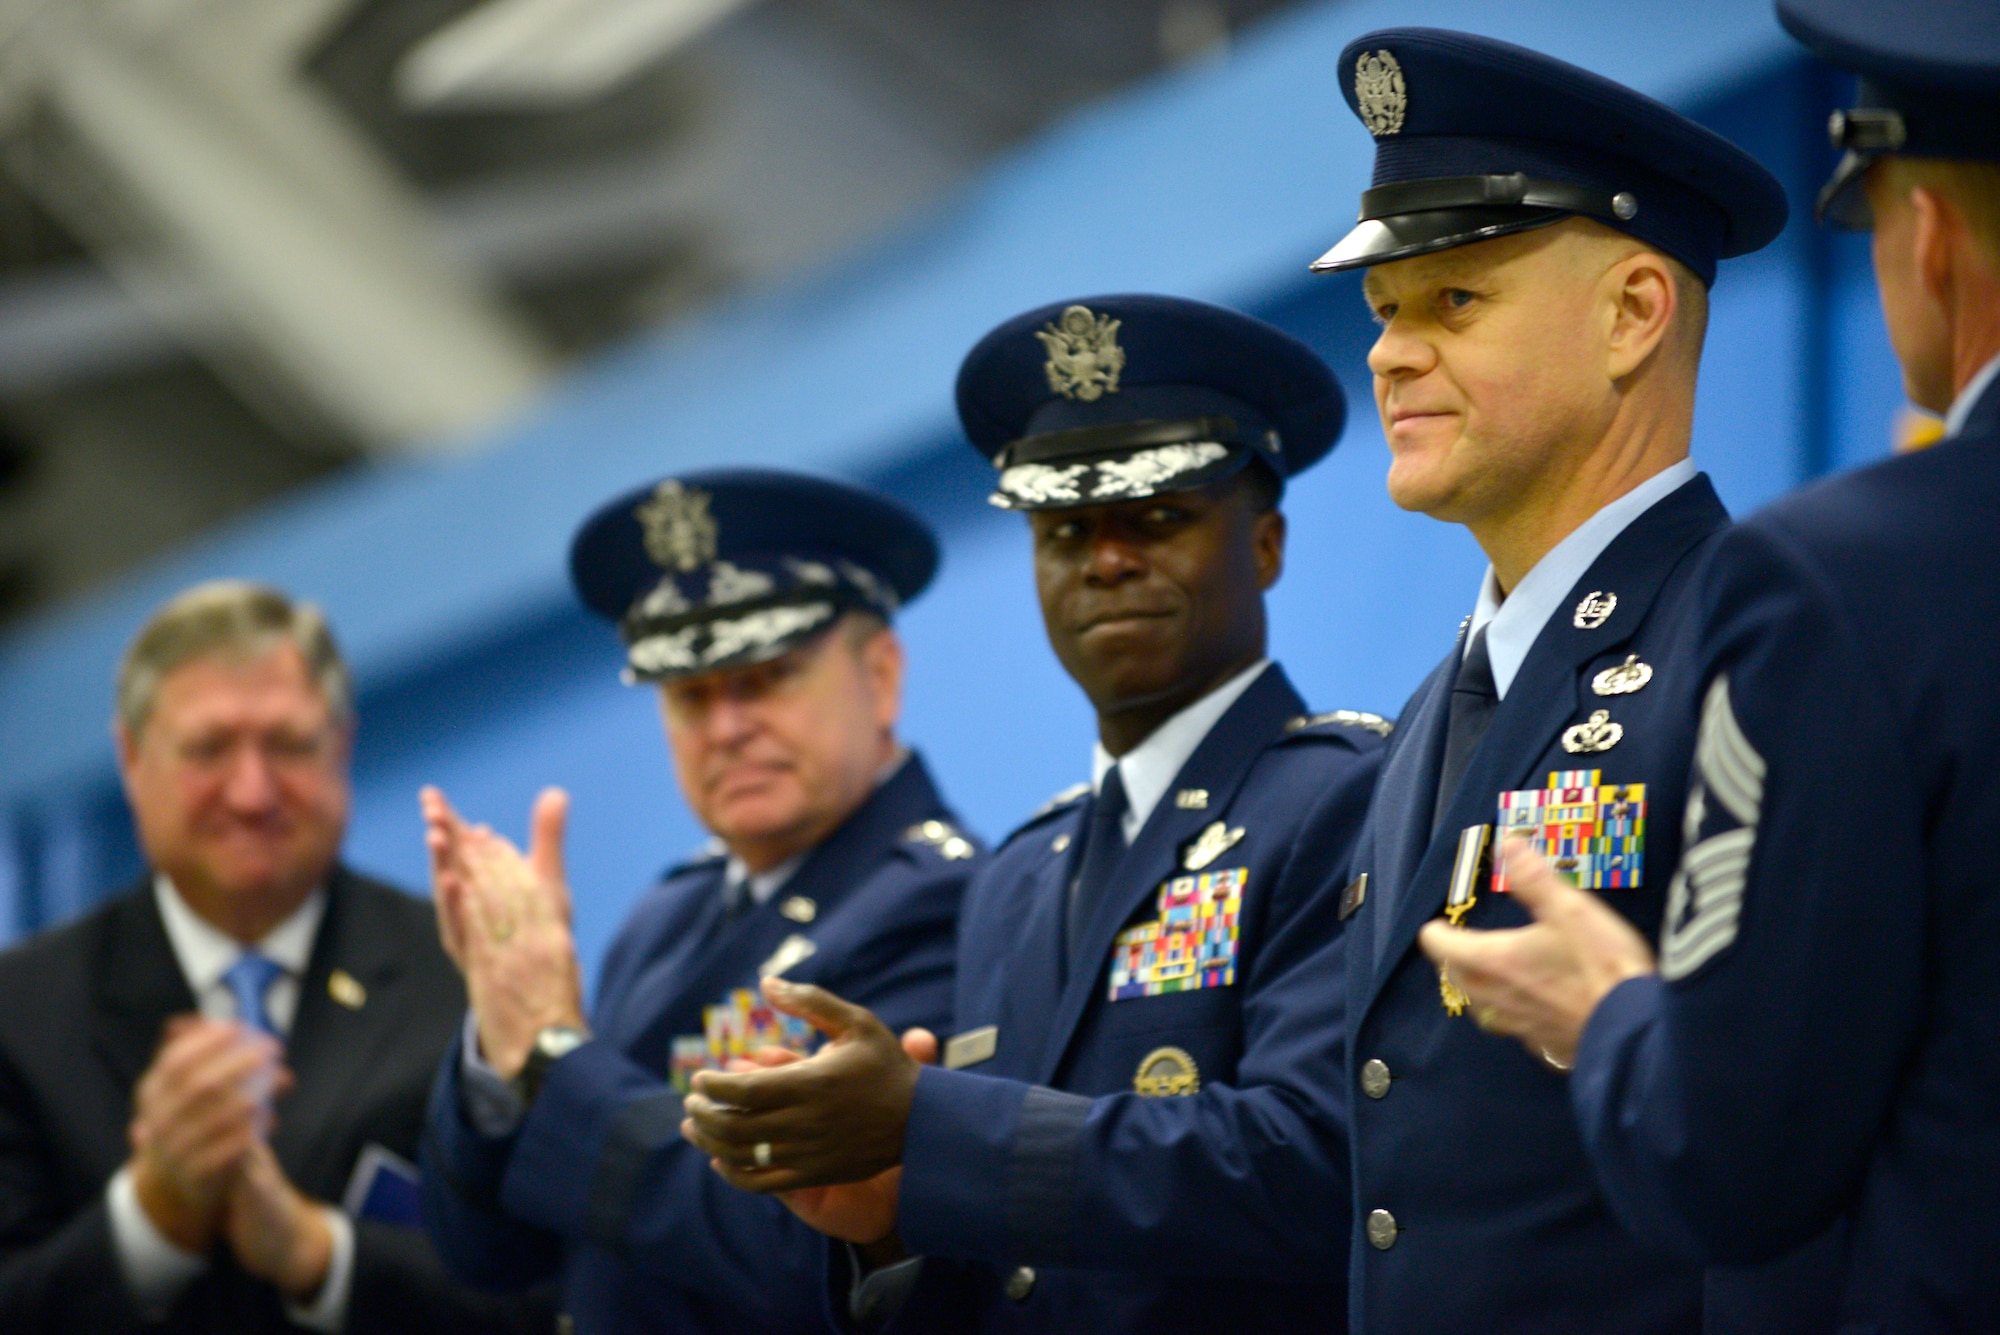 Secretary of the Air Force, Michael Donley, Air Force Chief of Staff Gen. Mark A. Welsh III, and Commander Air Education and Training Command Gen. Edward A. Rice Jr. congratulate Chief Master Sgt. of the Air Force James Roy as he retires after more than 30 years of service at Joint Base Andrews, Md., on Jan. 24, 2013. (U.S. Air Force photo/Master Sgt. Cecilio Ricardo)